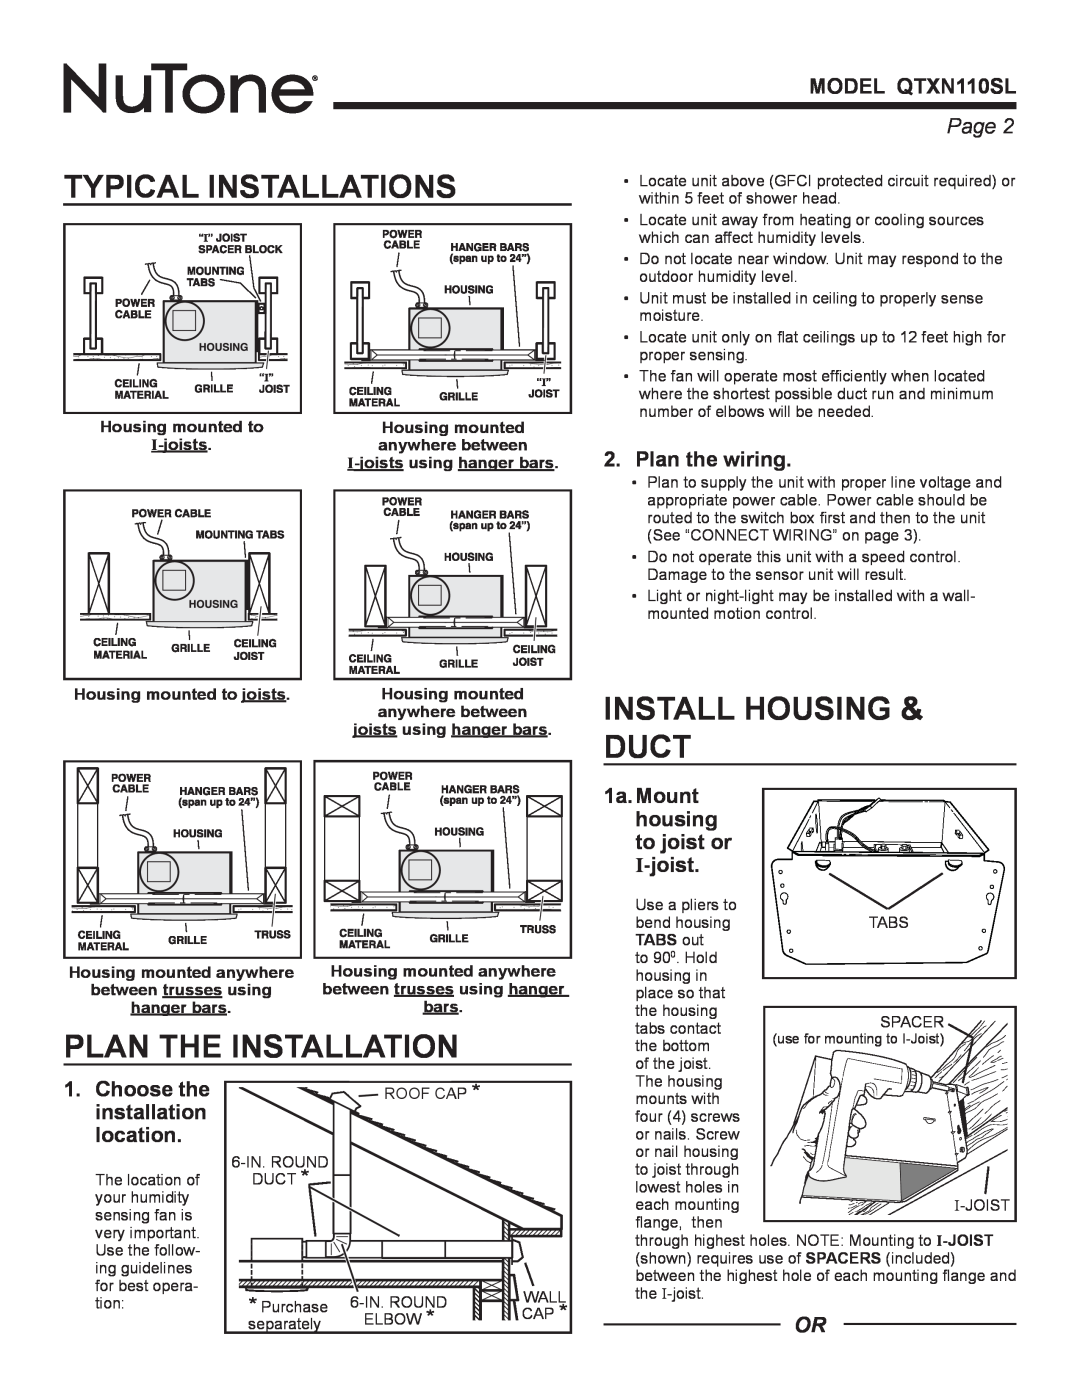 NuTone Typical Installations, Install Housing & Duct, Plan The Installation, MODEL QTXN110SL, Page , Plan the wiring 